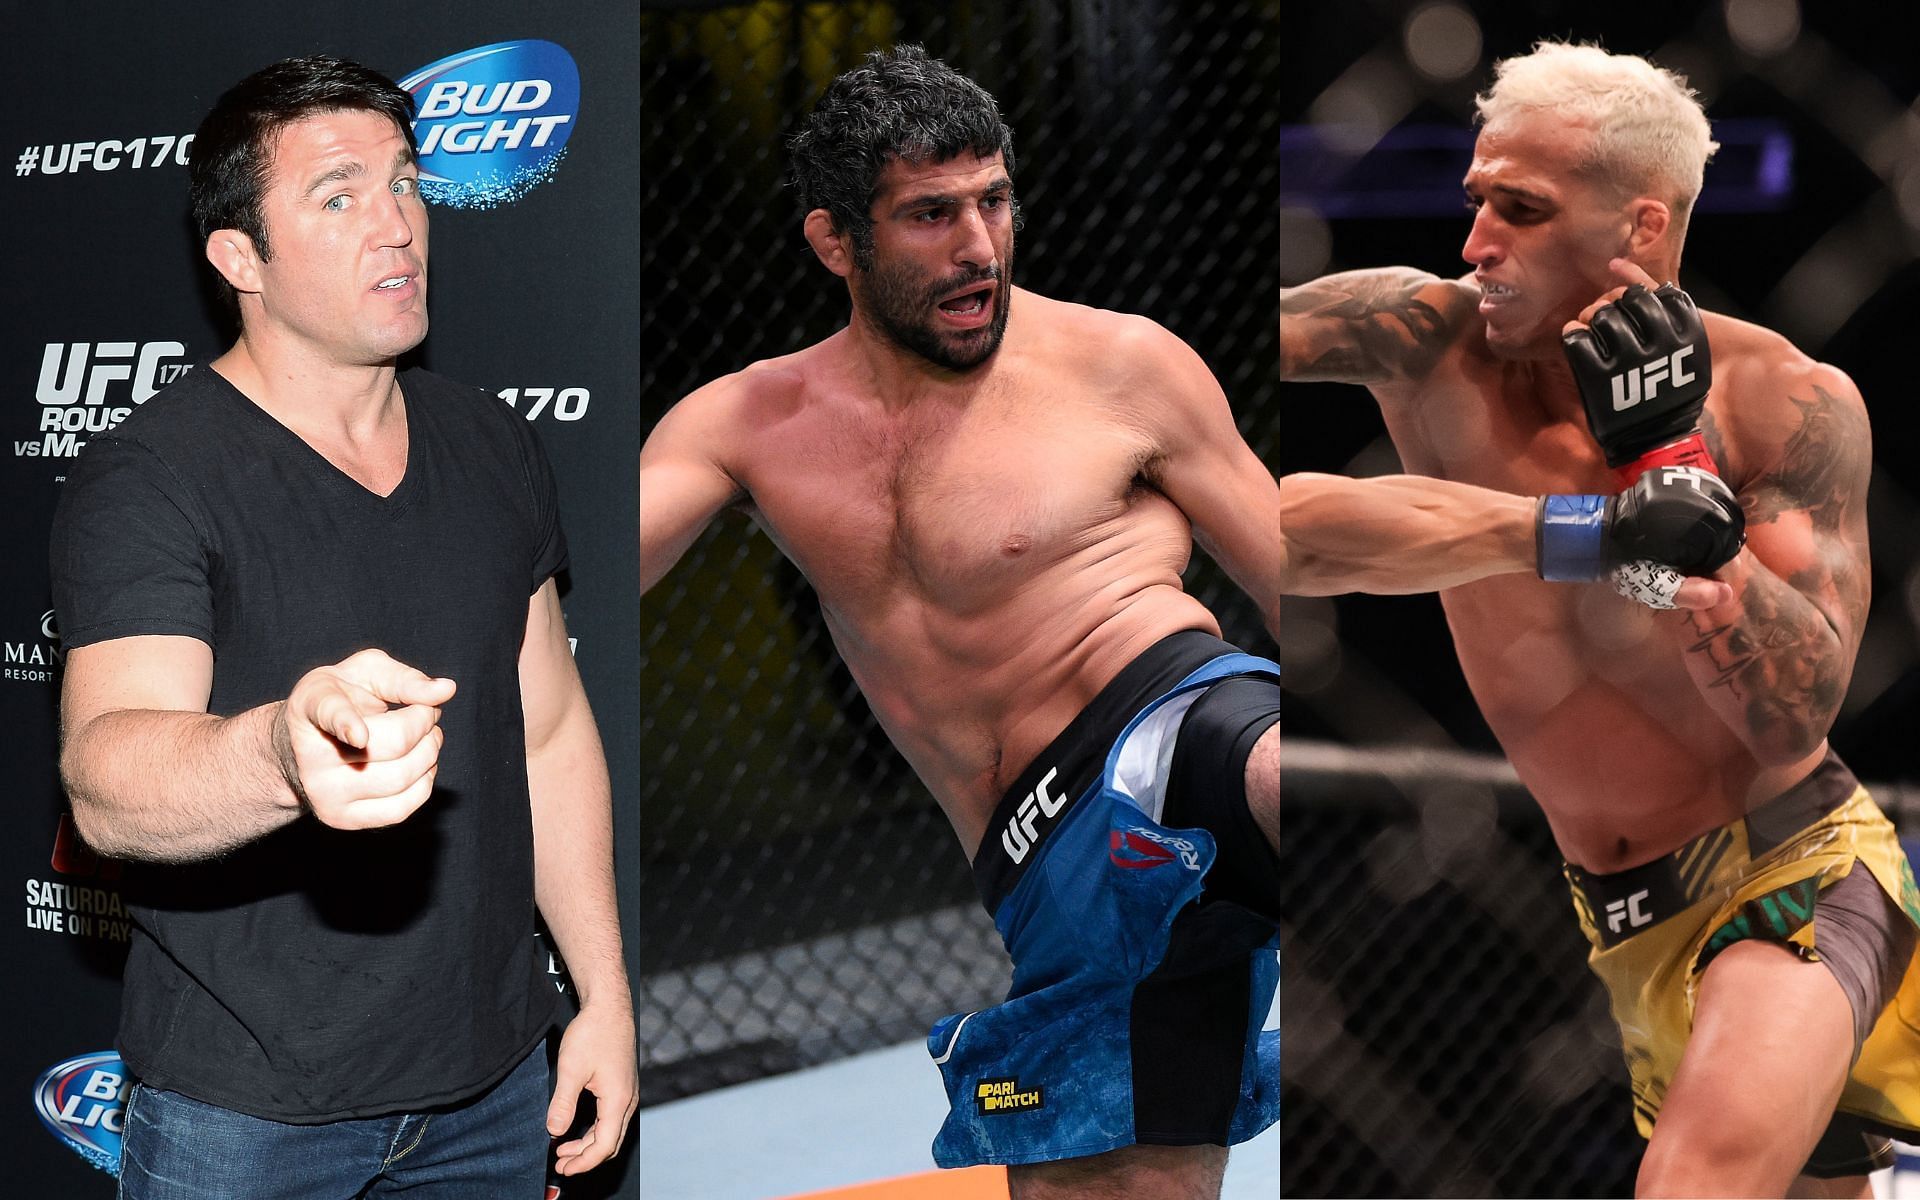 Chael Sonnen (Left), Beneil Dariush (Middle), and Charles Oliveira (Right)